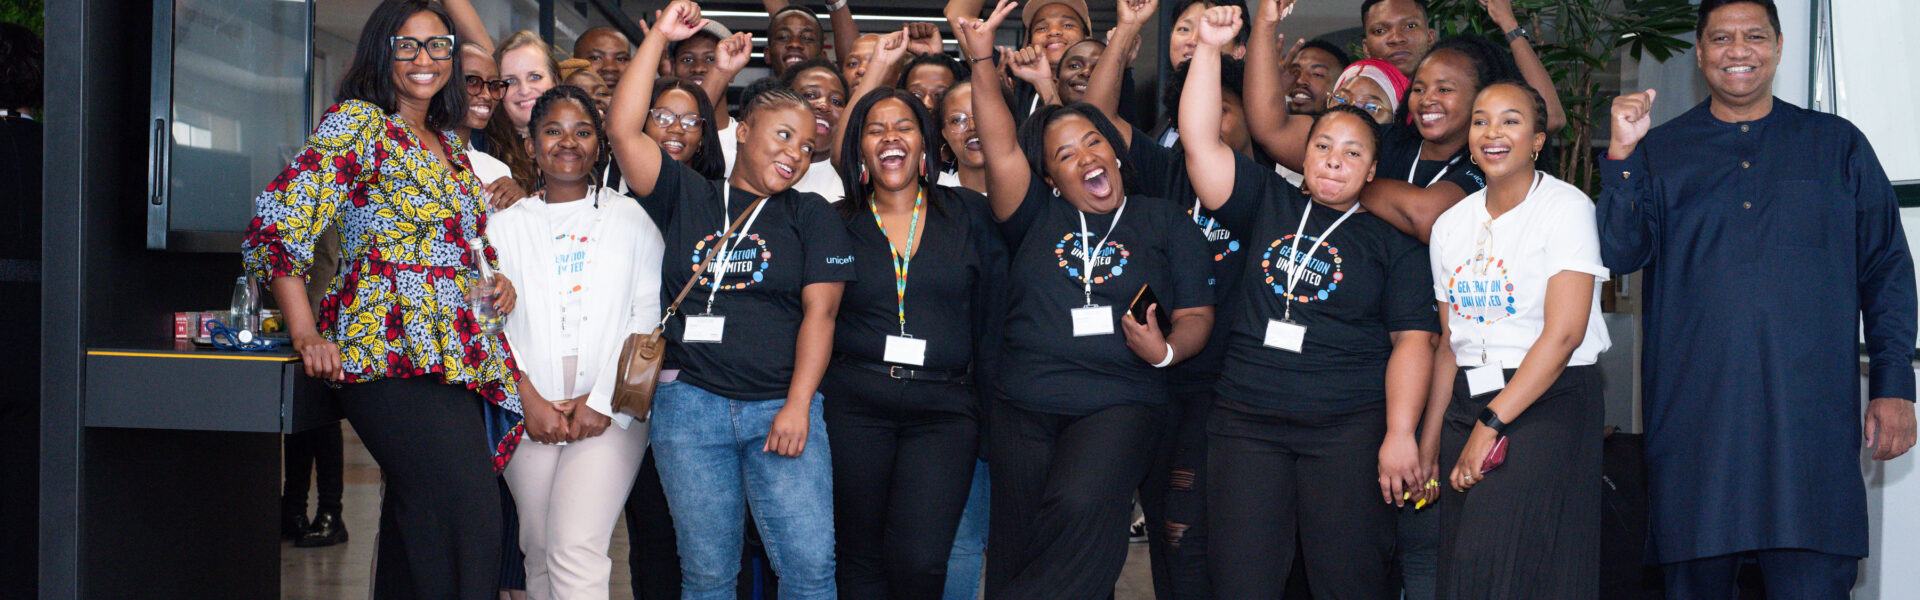 SAP, UNICEF and GenU Activate SAP Educate to Employ Youth Skills Initiative in South Africa